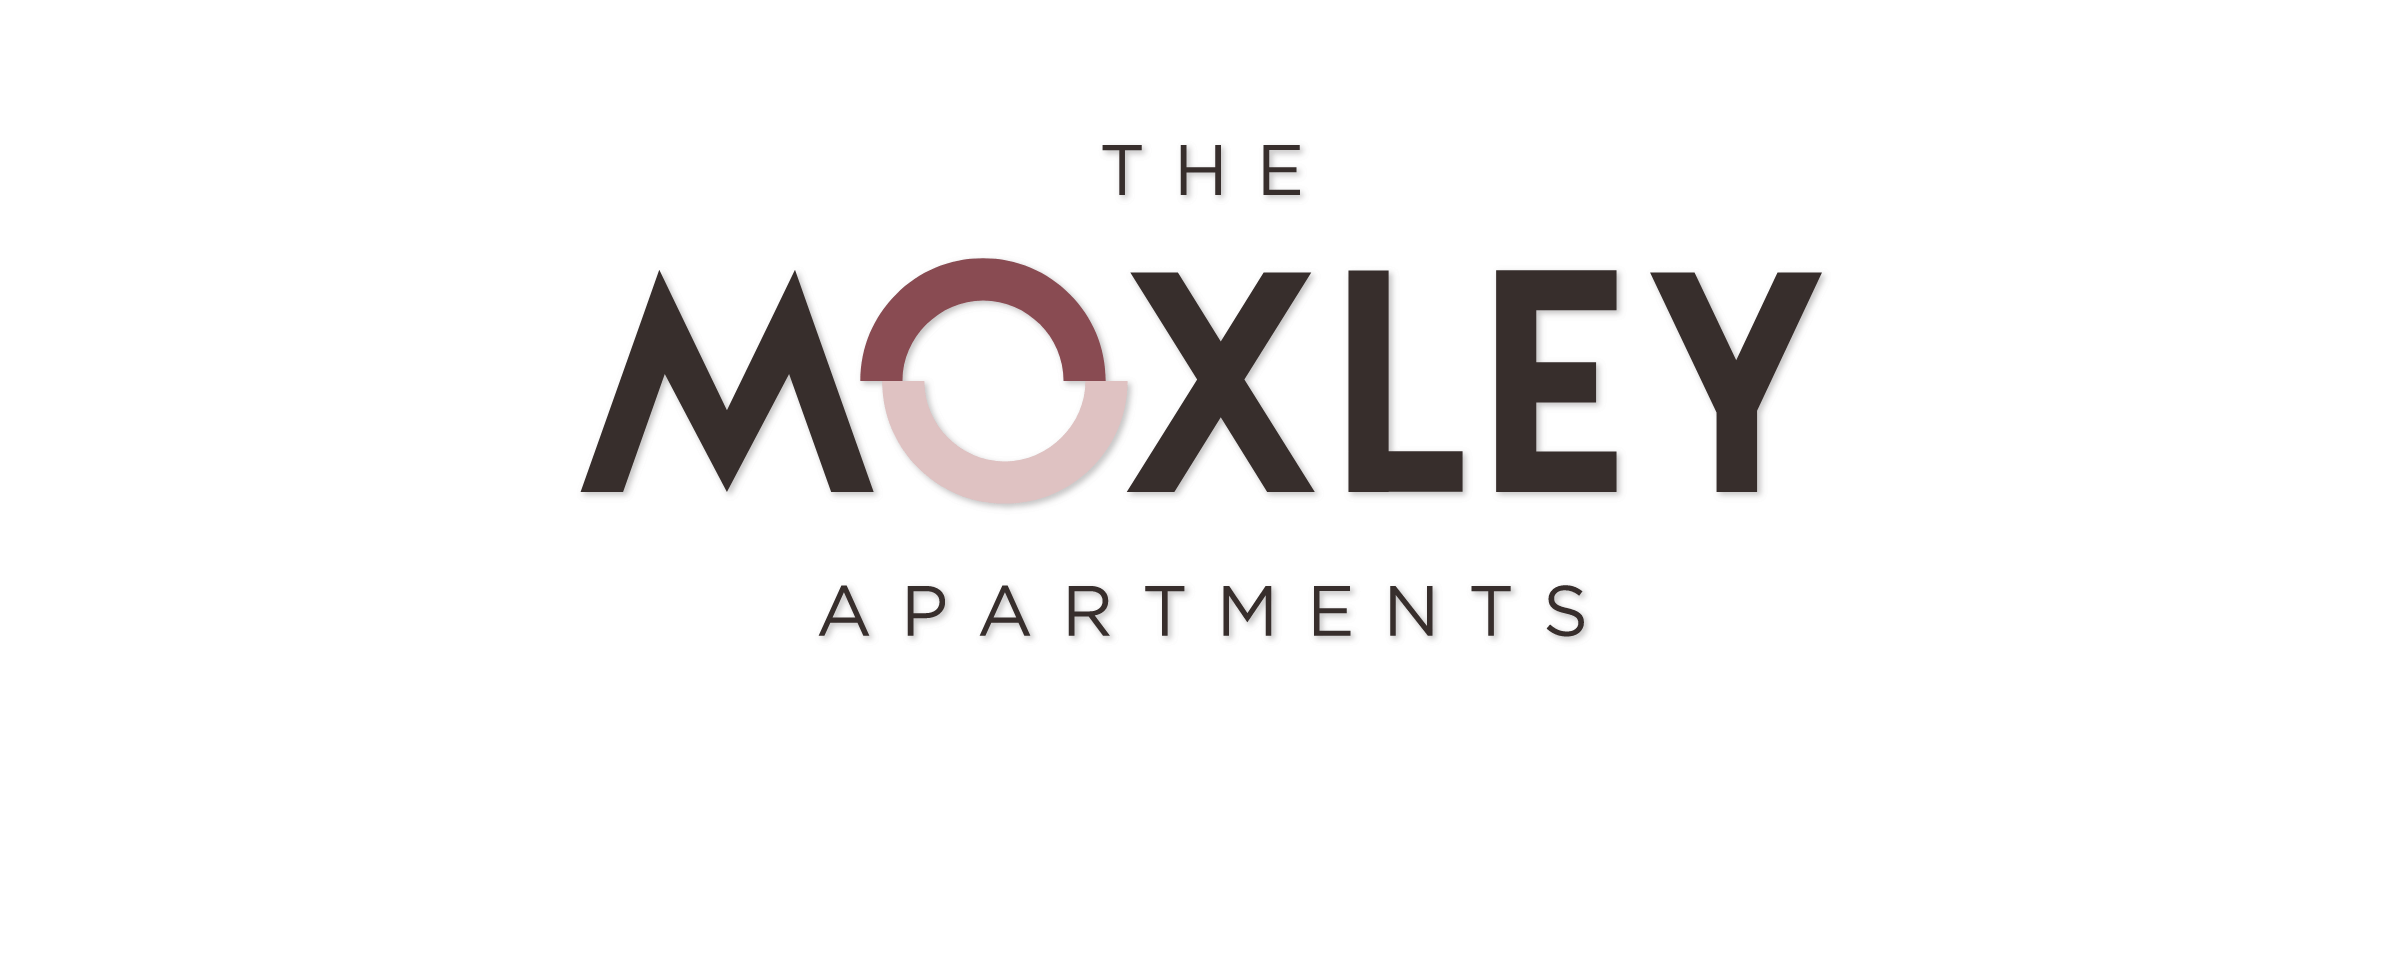 The Moxley Apartments